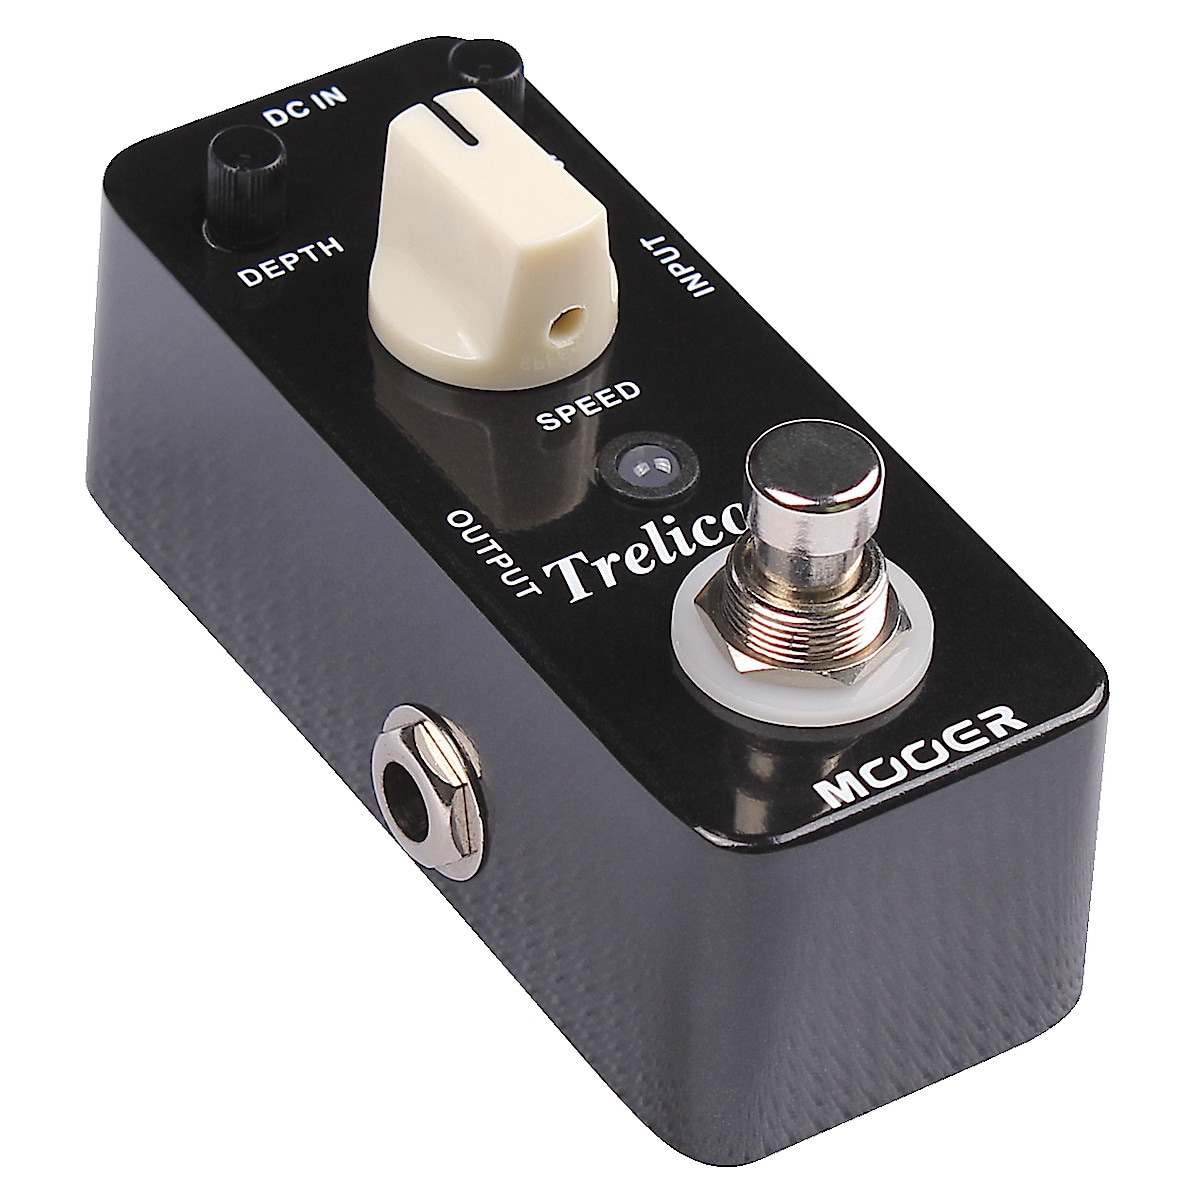 Mooer Trelicopter pedal